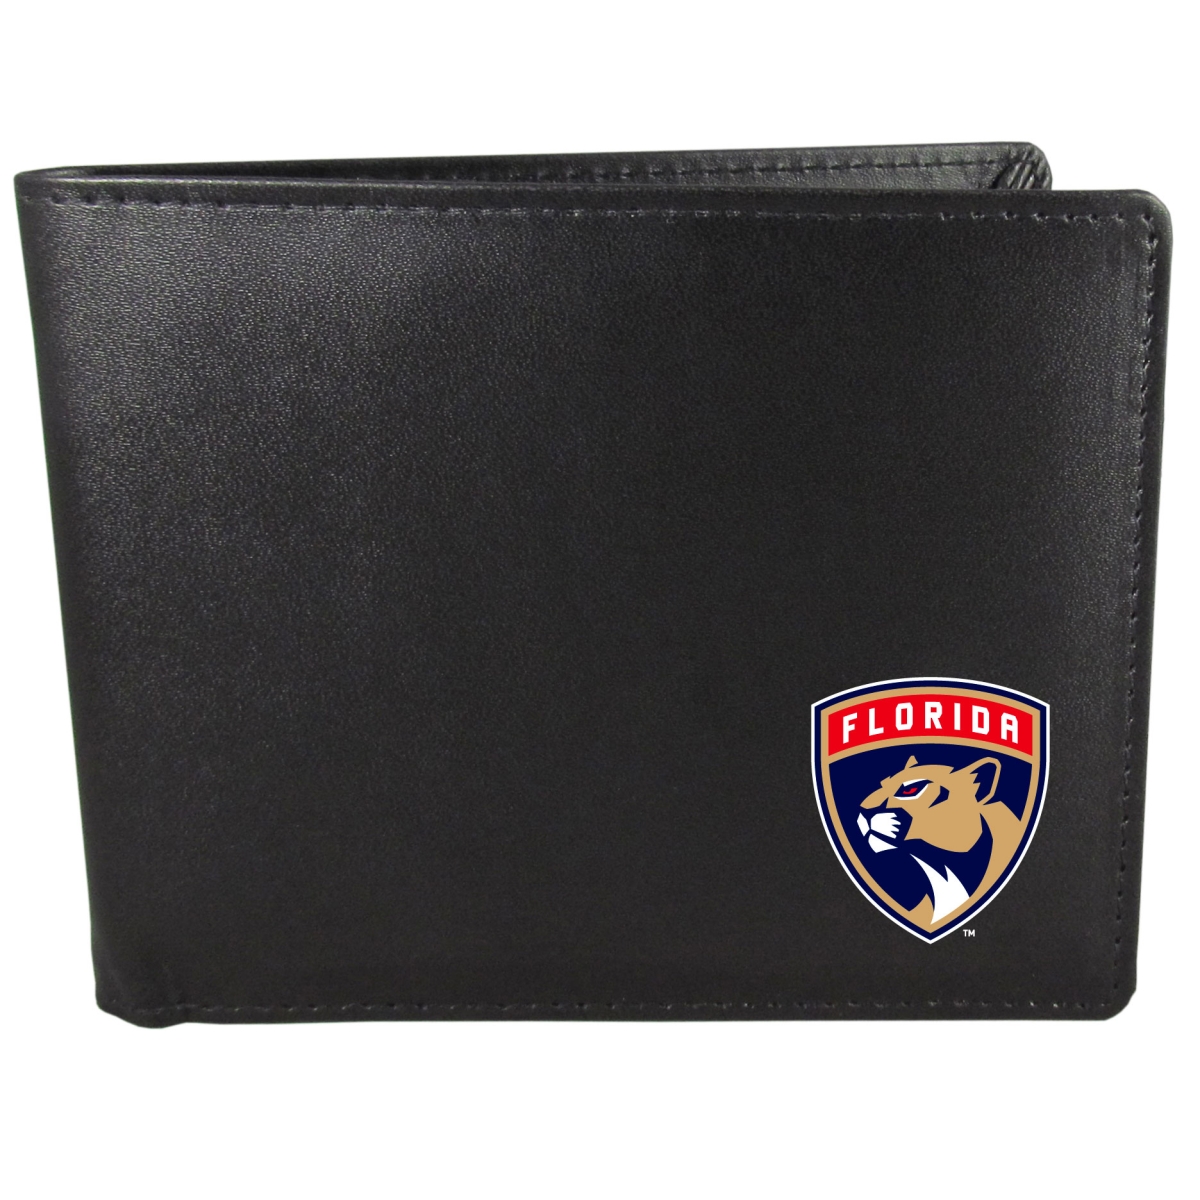 Picture of Siskiyou HBWP95 Male NHL Florida Panthers Bi-fold Wallet - One Size